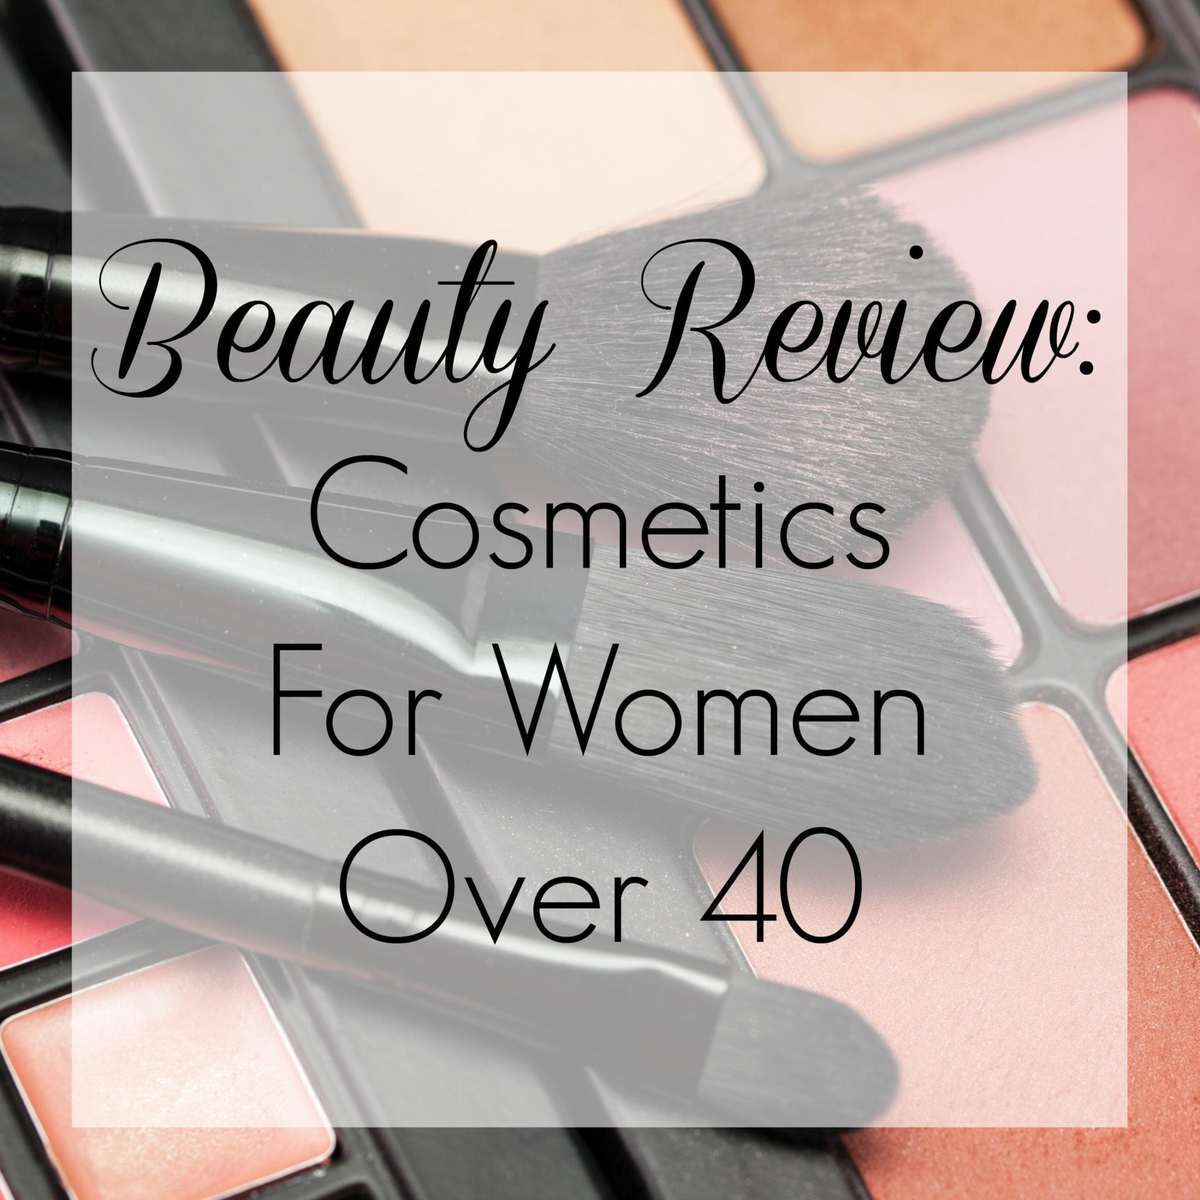 Recent Beauty Purchases – Hits and Misses